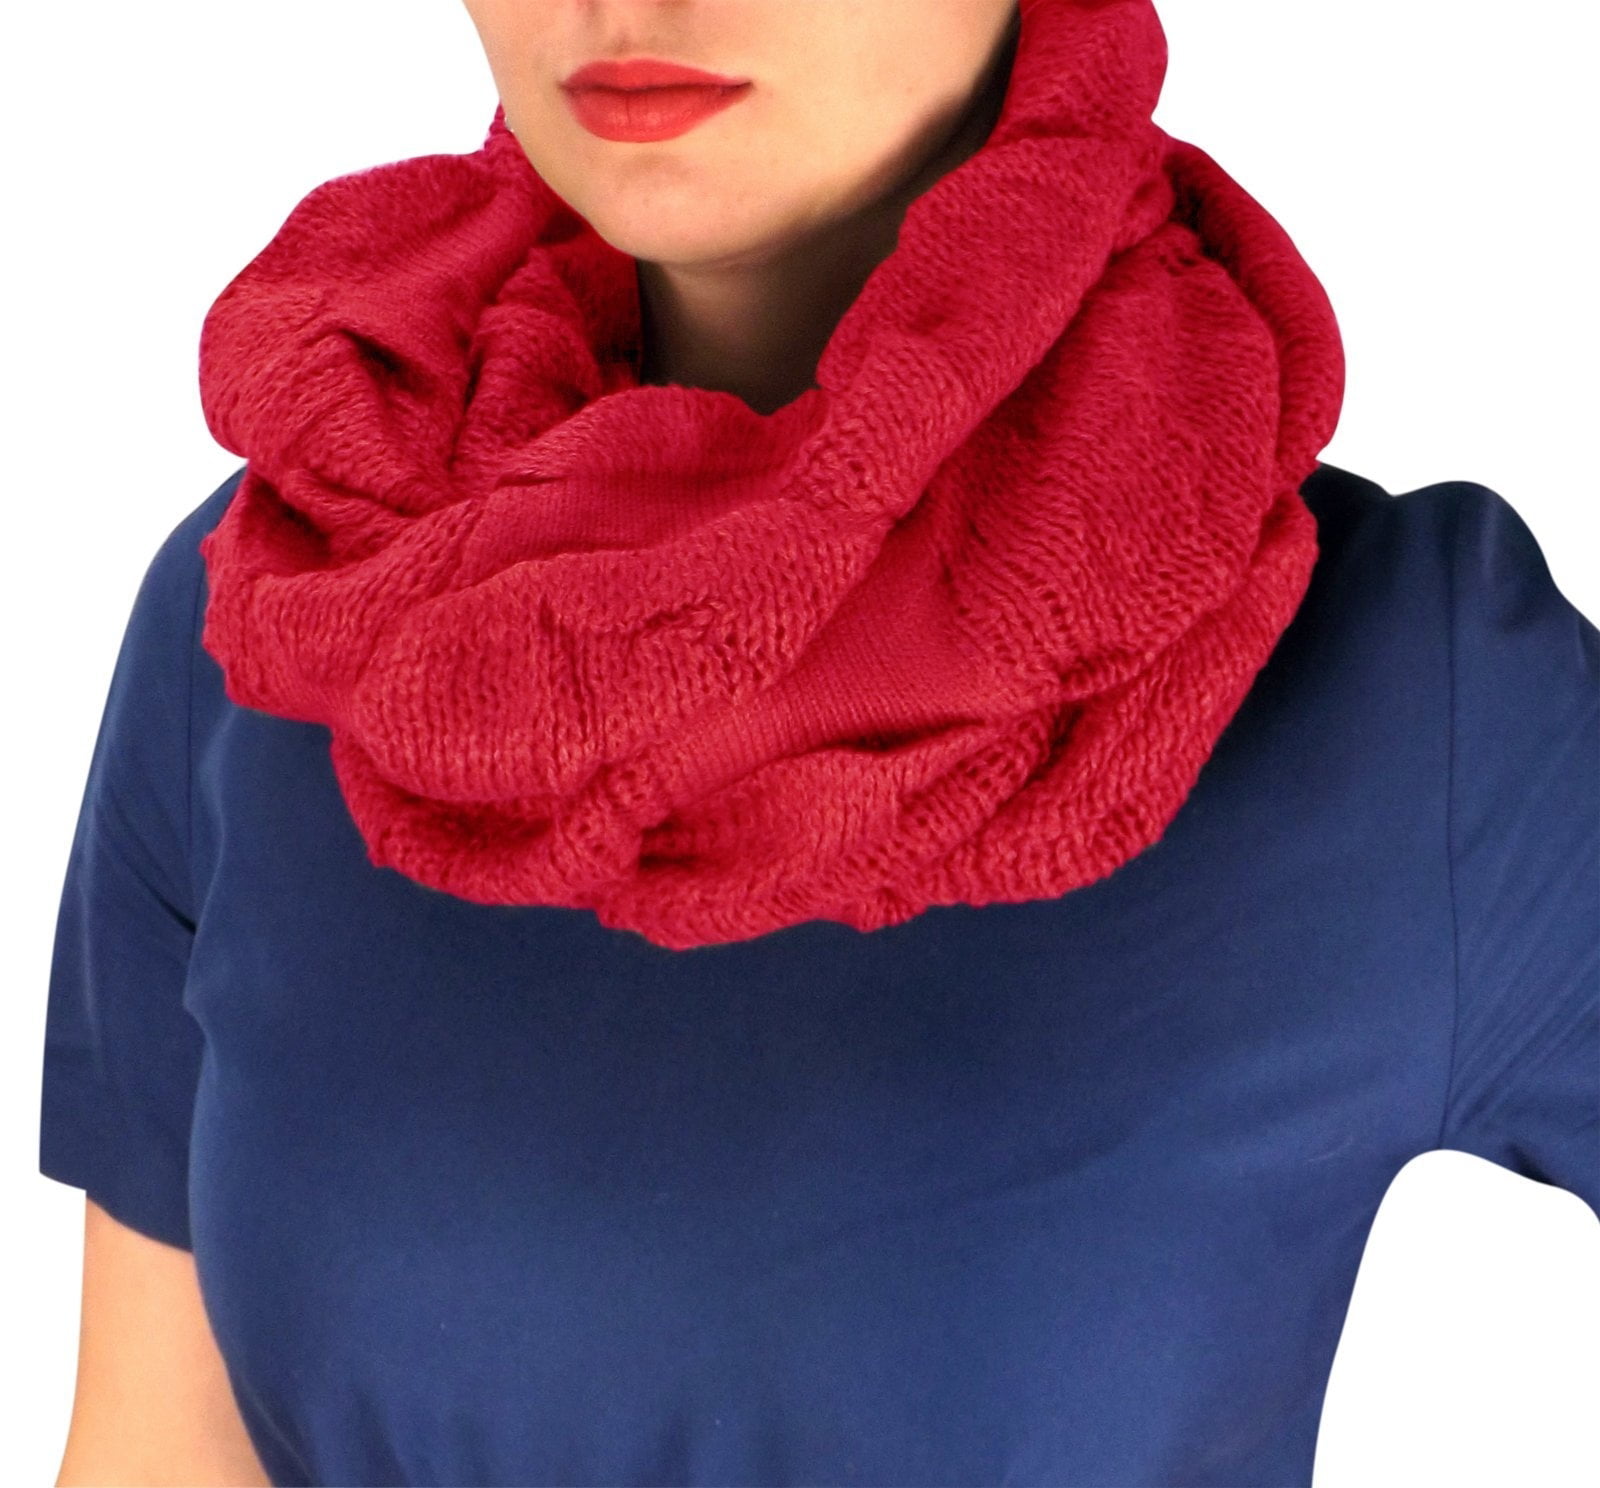 *US SELLER*wholesale lot of 5 double layer scarf shawls neck warmer 